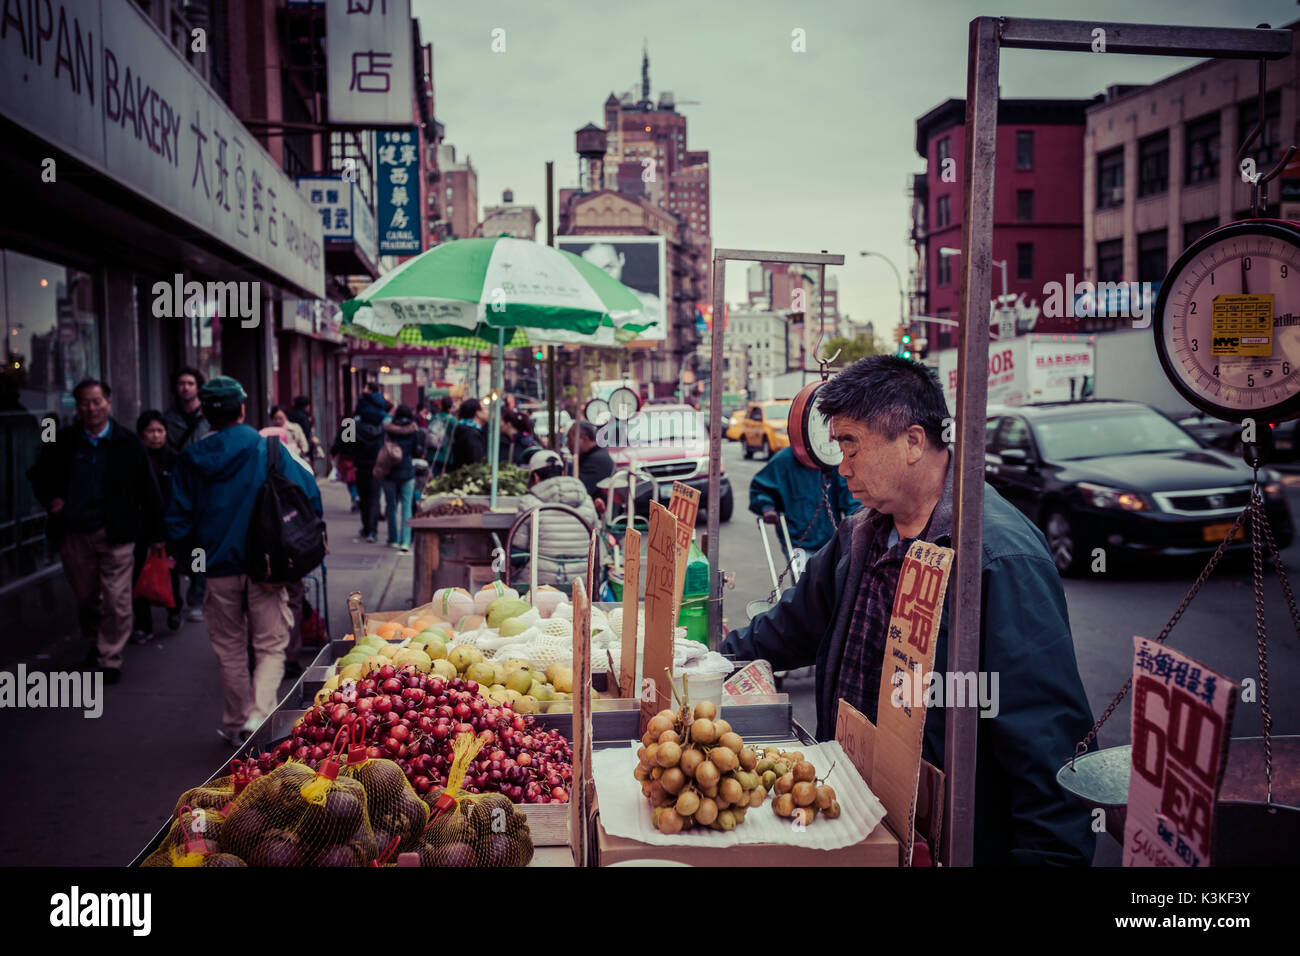 A fruit market stand and streetscape with cars and pedestrians in Chinatown, Manhatten, New York, USA Stock Photo